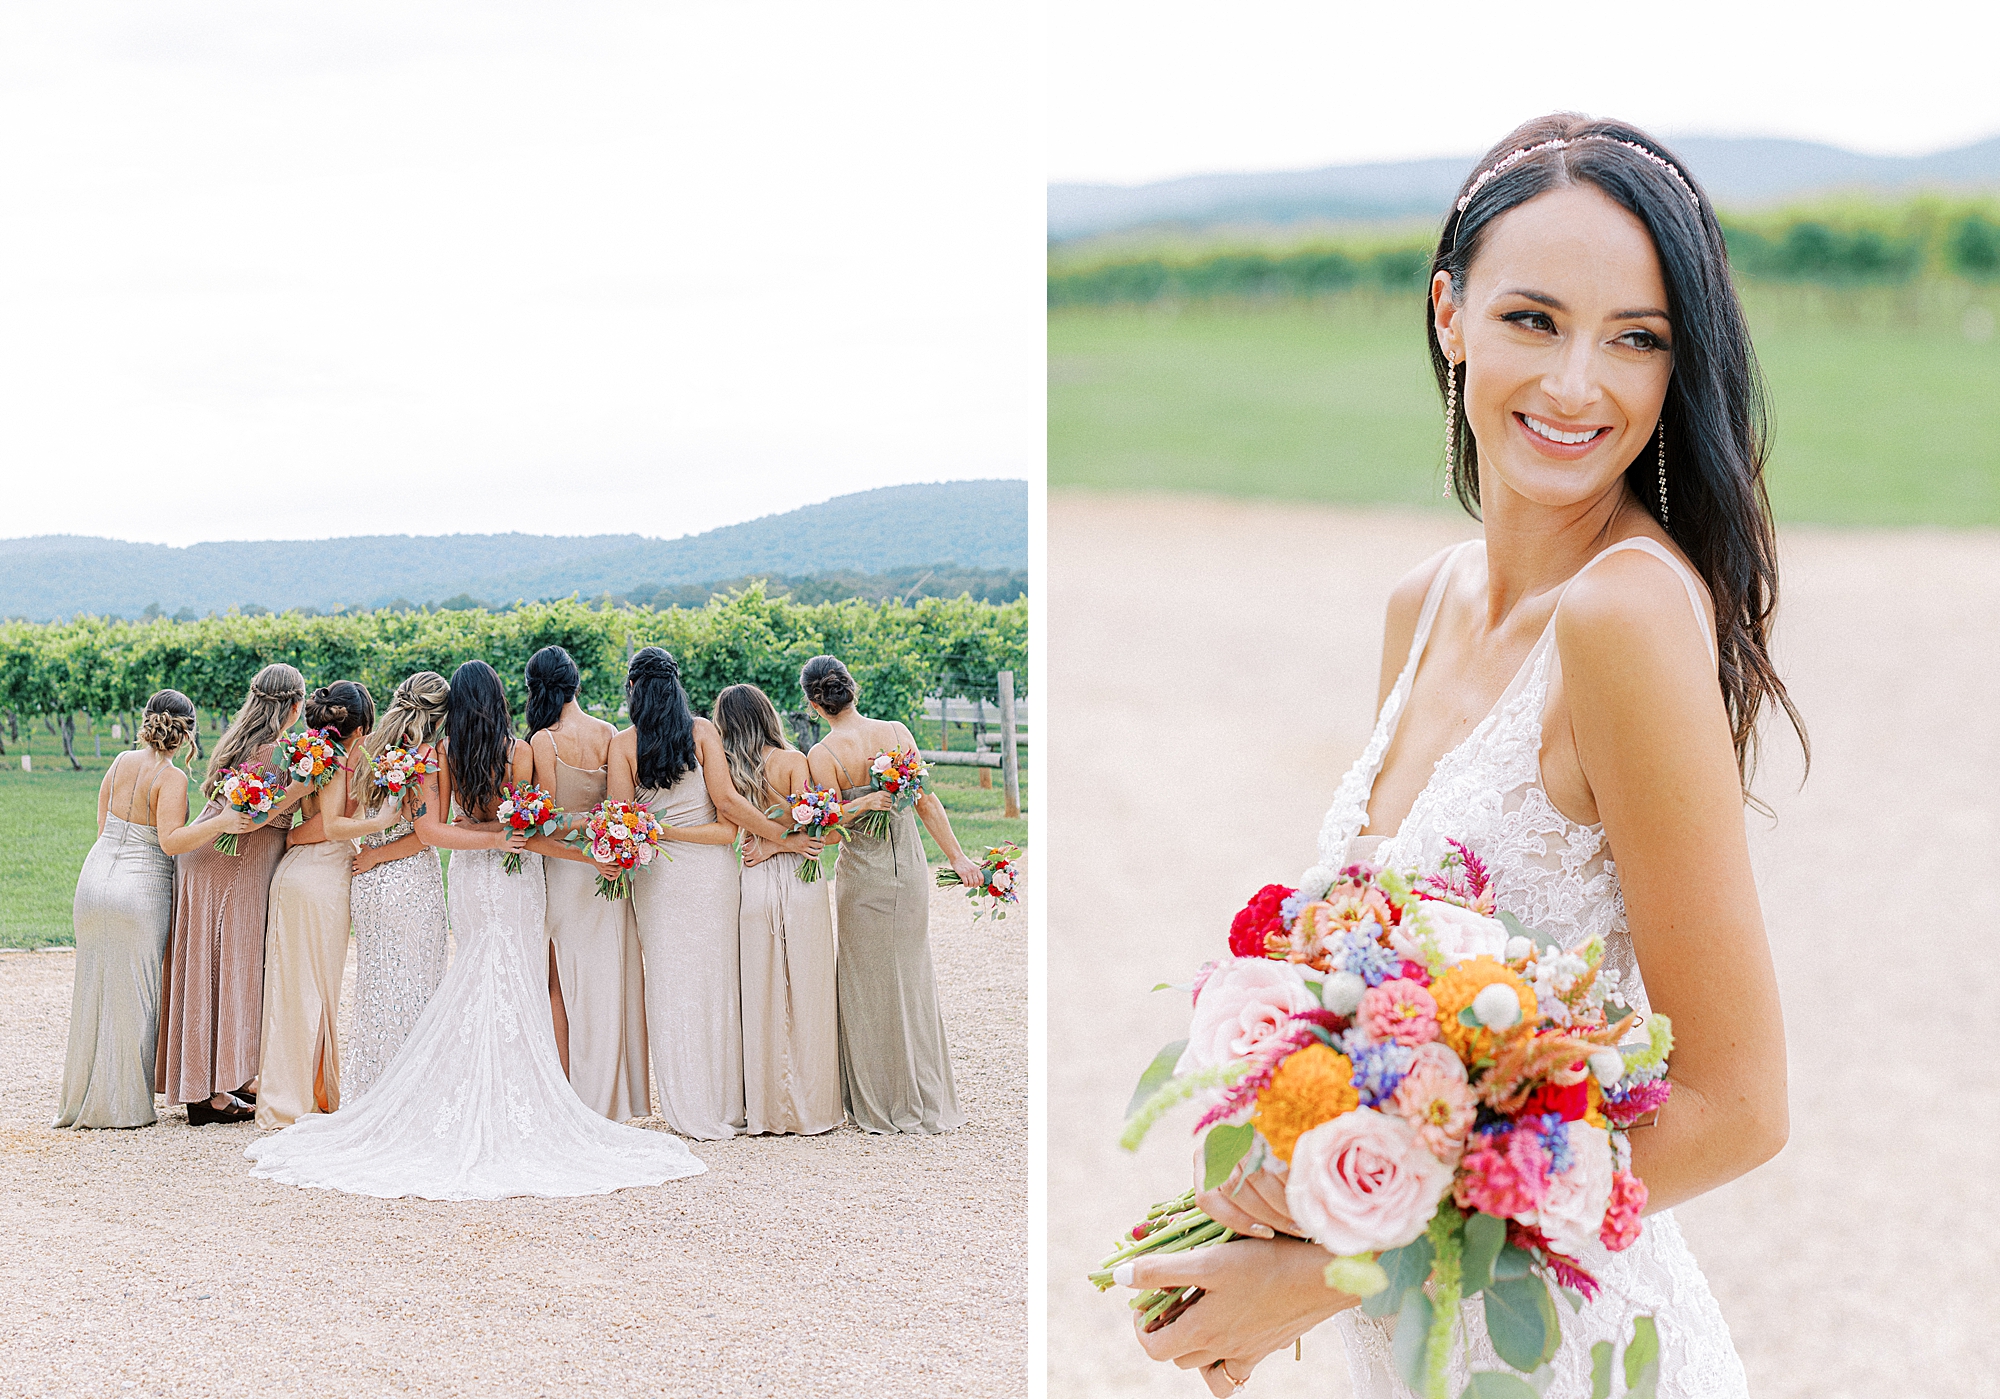 Colorful bouquets with champagne colored bridesmaid dresses.